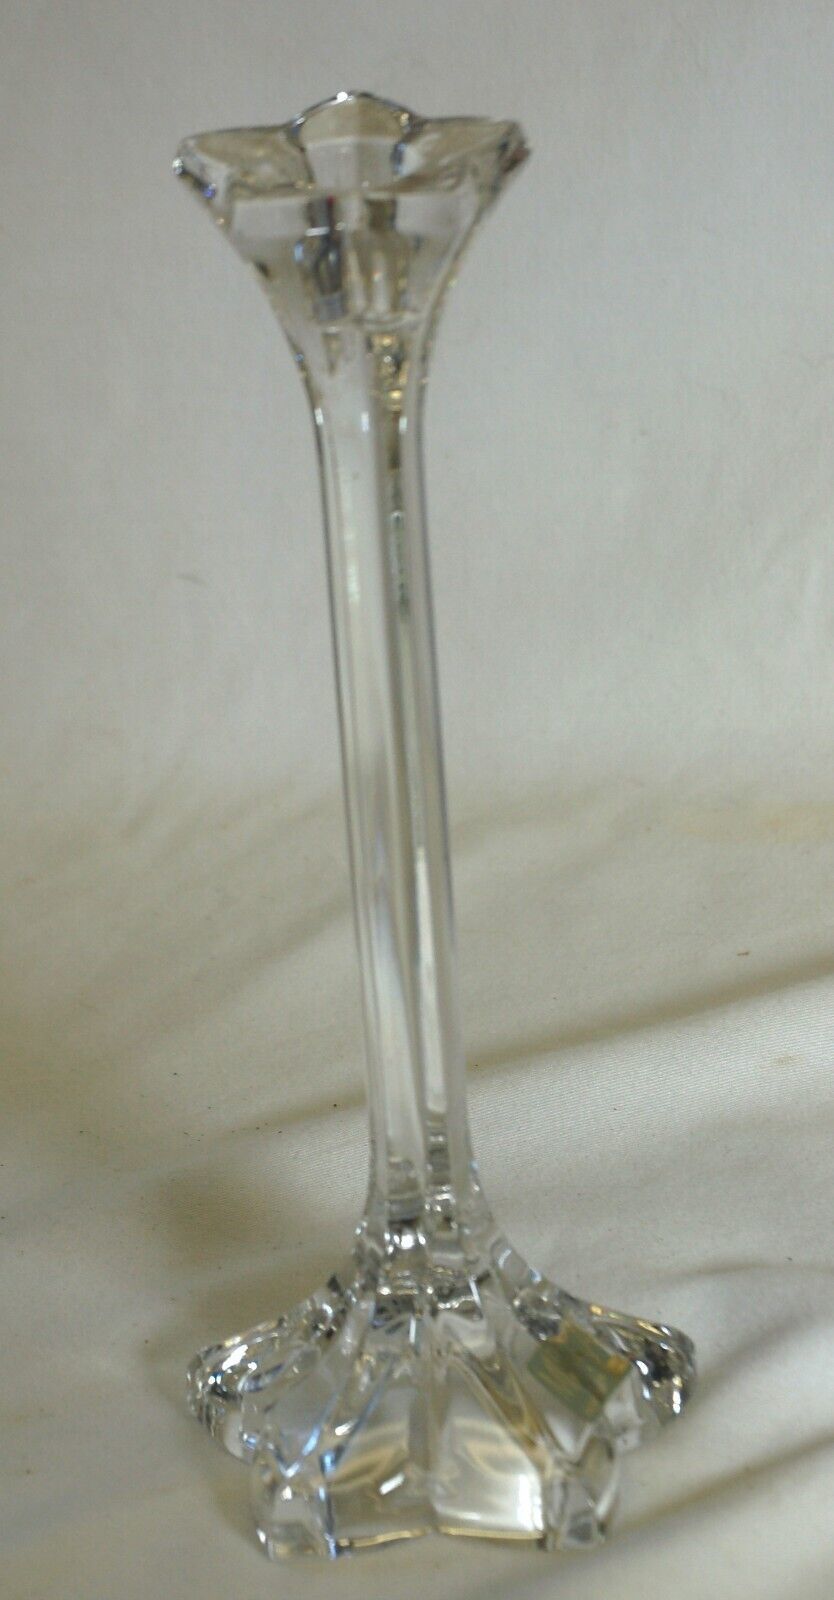 Primary image for Mikasa Crystal Petal Candlestick Taper Candle Holder 5 Point Base Germany